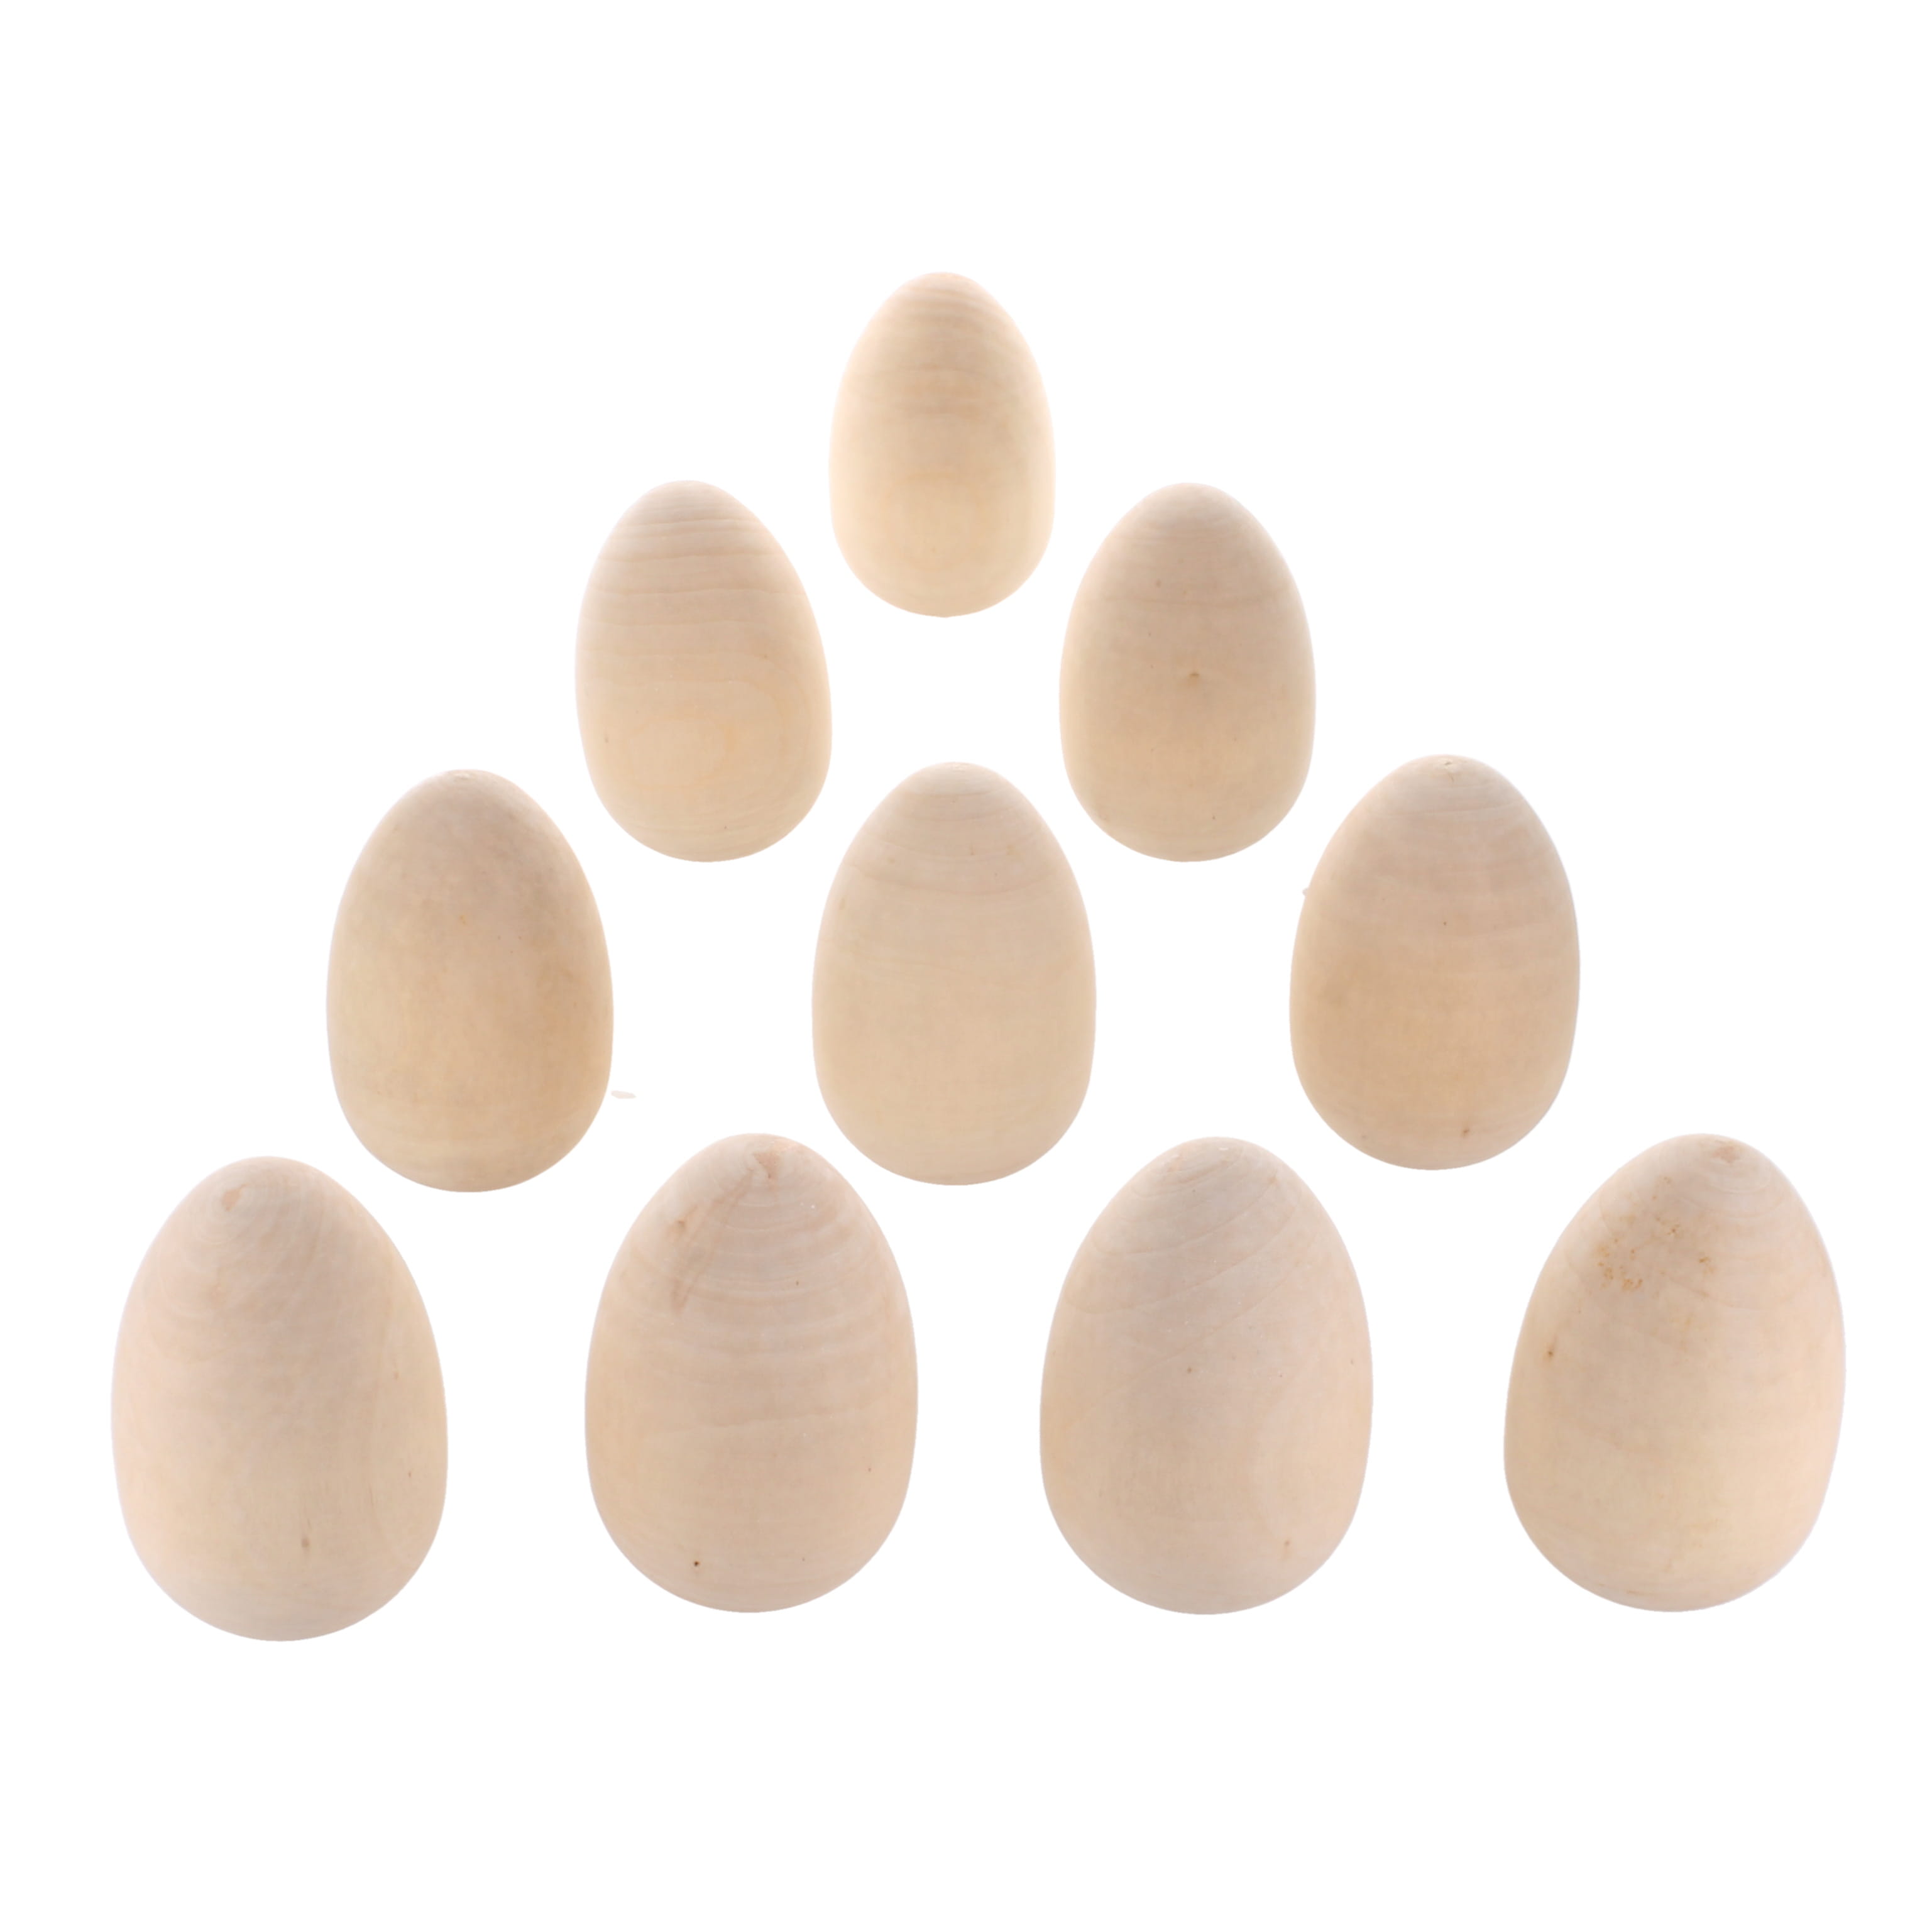 Wooden Eggs - pack of 10